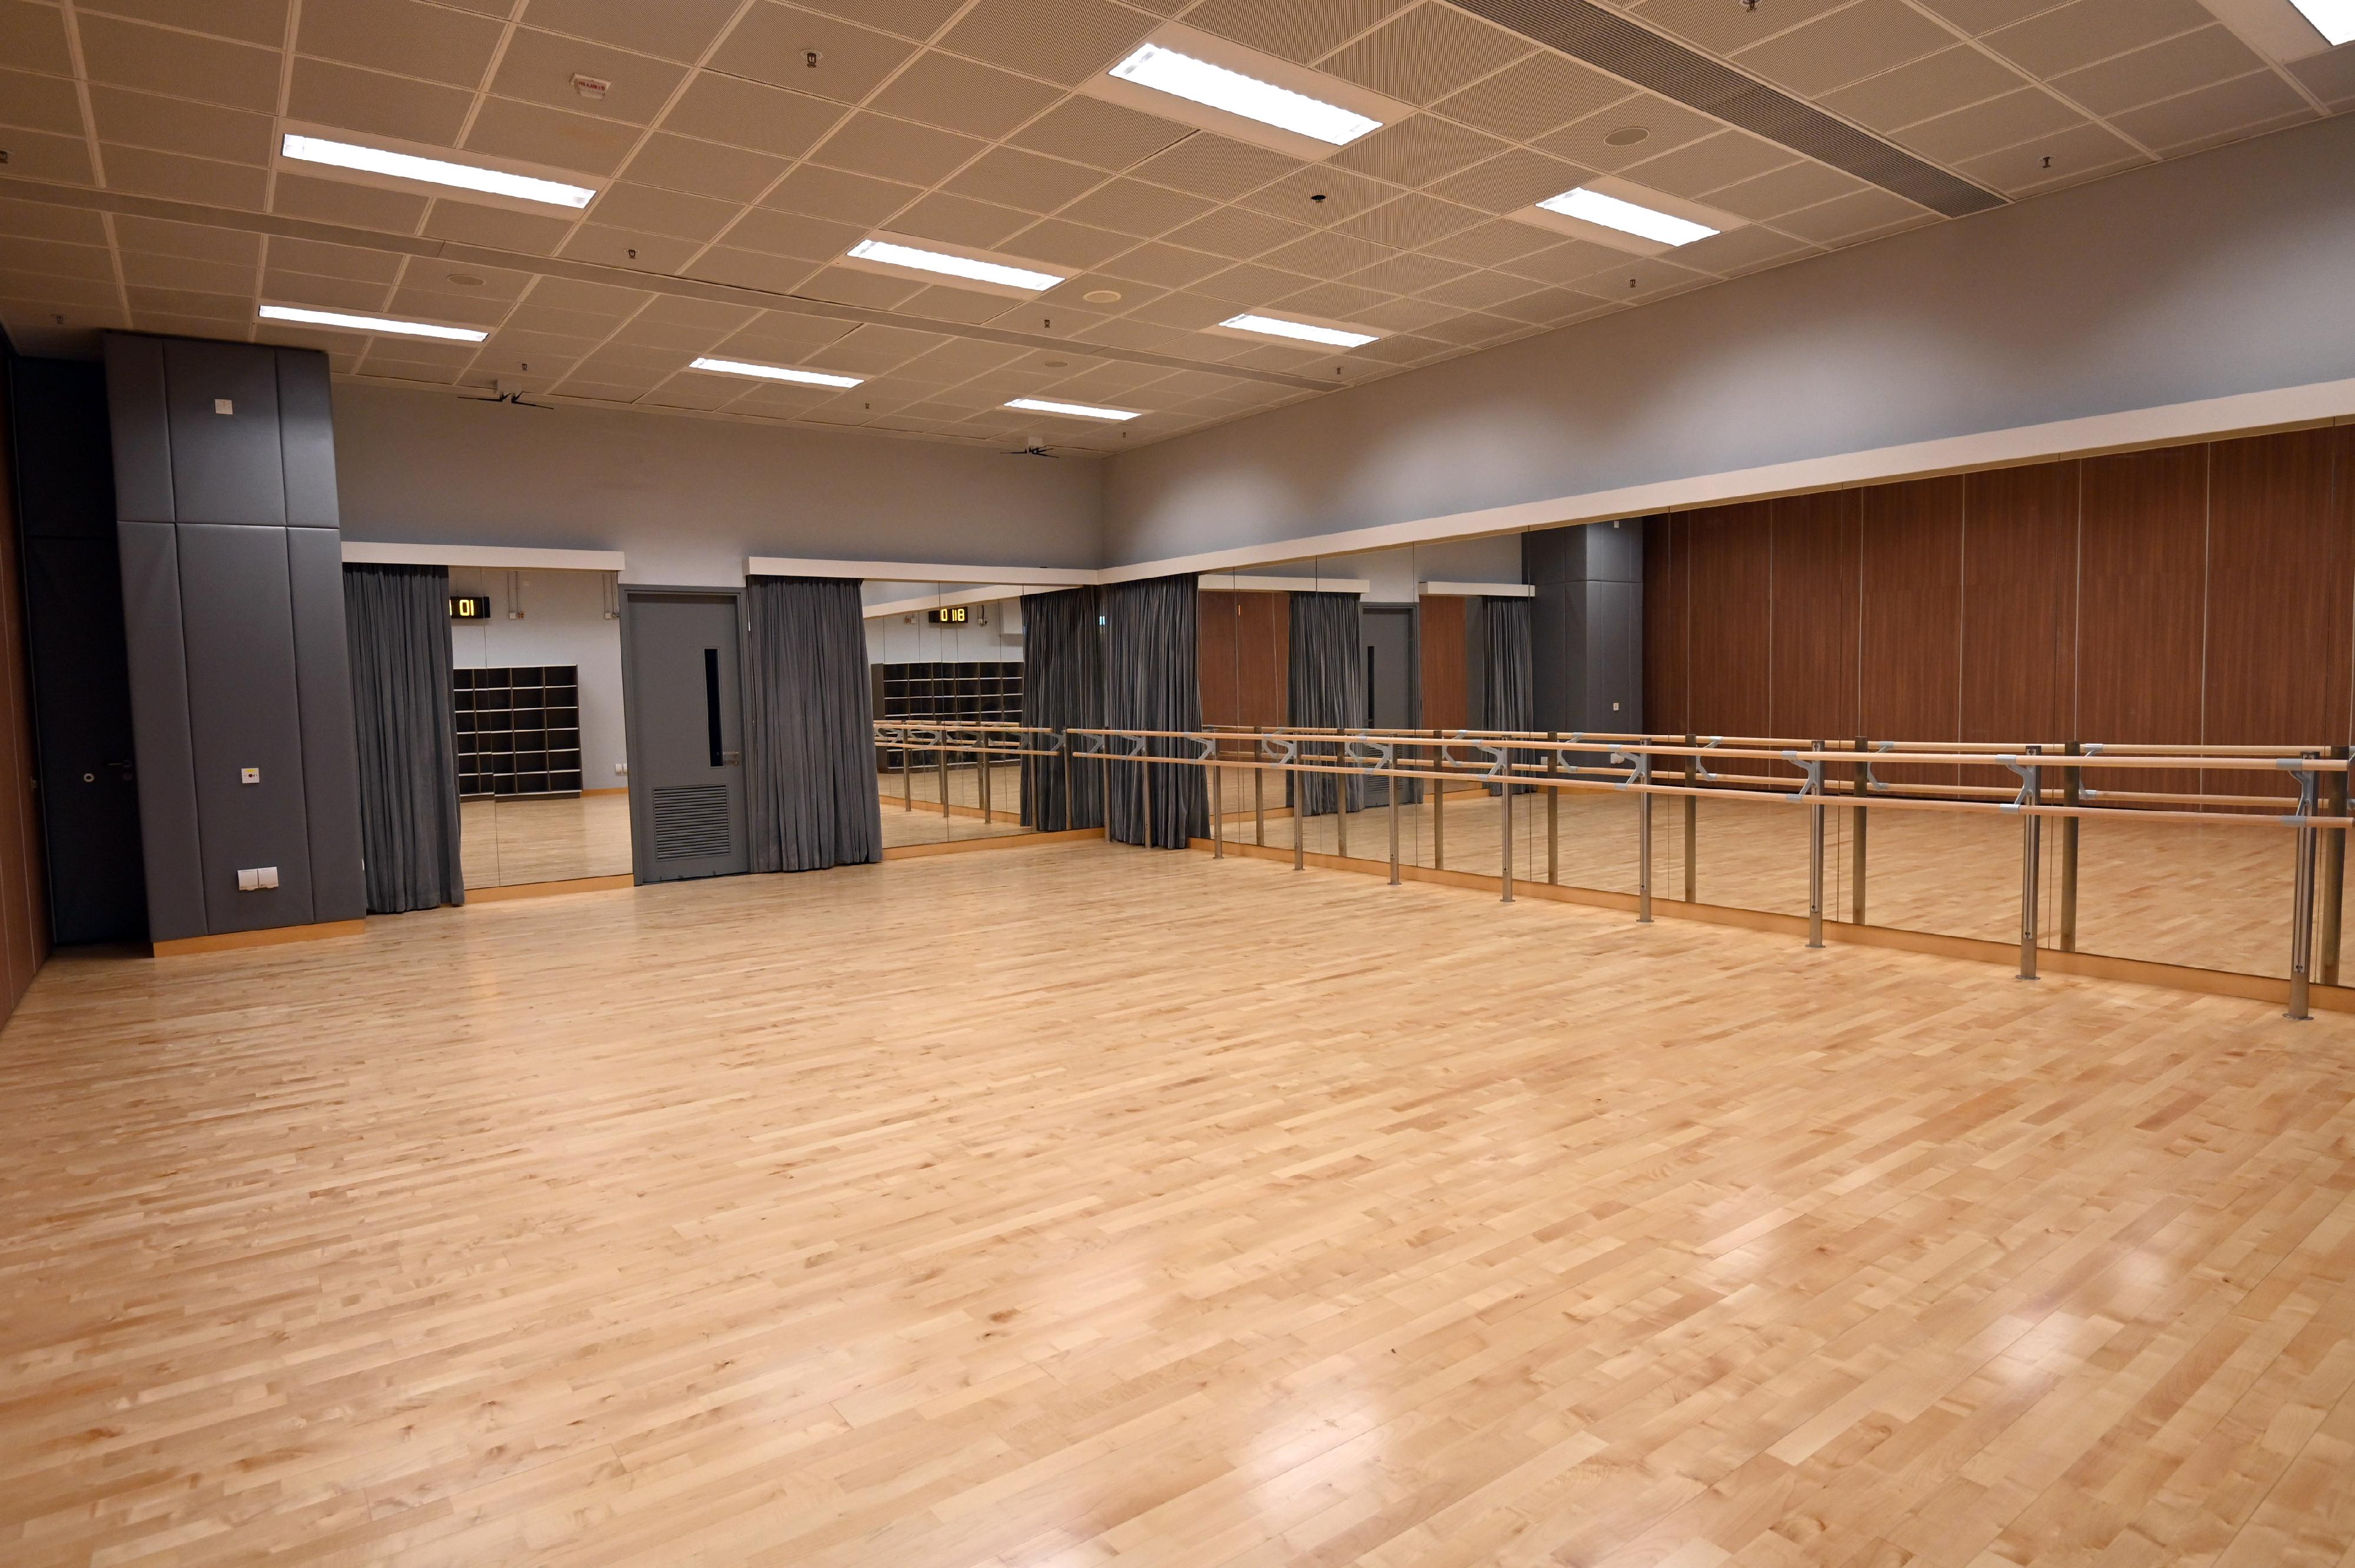 The newly built Tung Cheong Street Sports Centre, managed by the Leisure and Cultural Services Department, will open for public use on August 15 (Monday), providing a wide range of leisure and sports facilities. Photo shows the multi-purpose activity room.